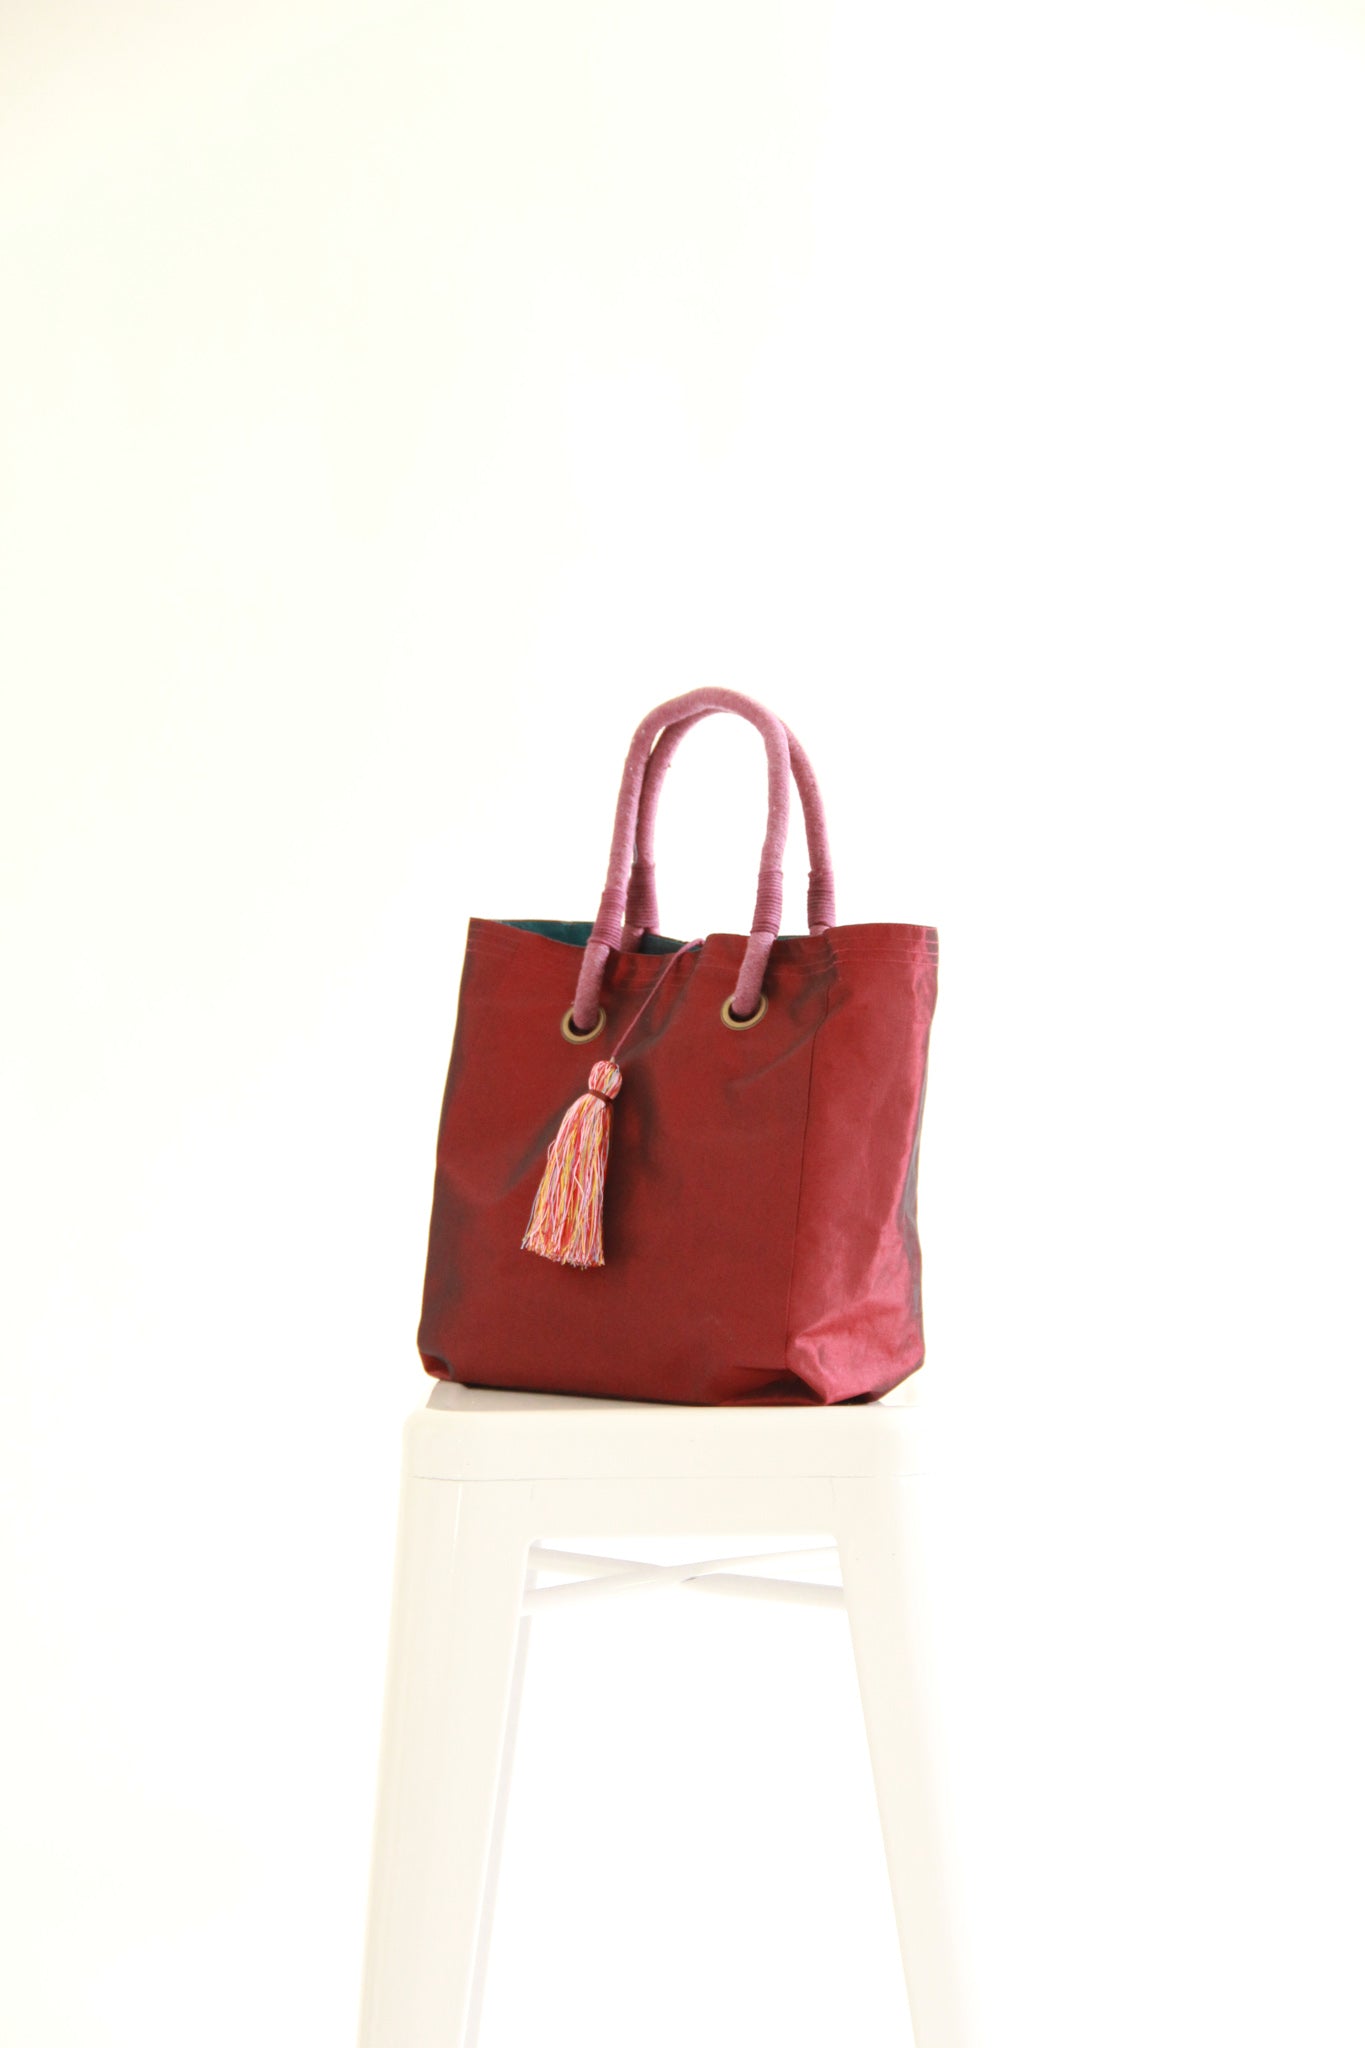 Reversible Tote Bag - Gifts by Art Tree